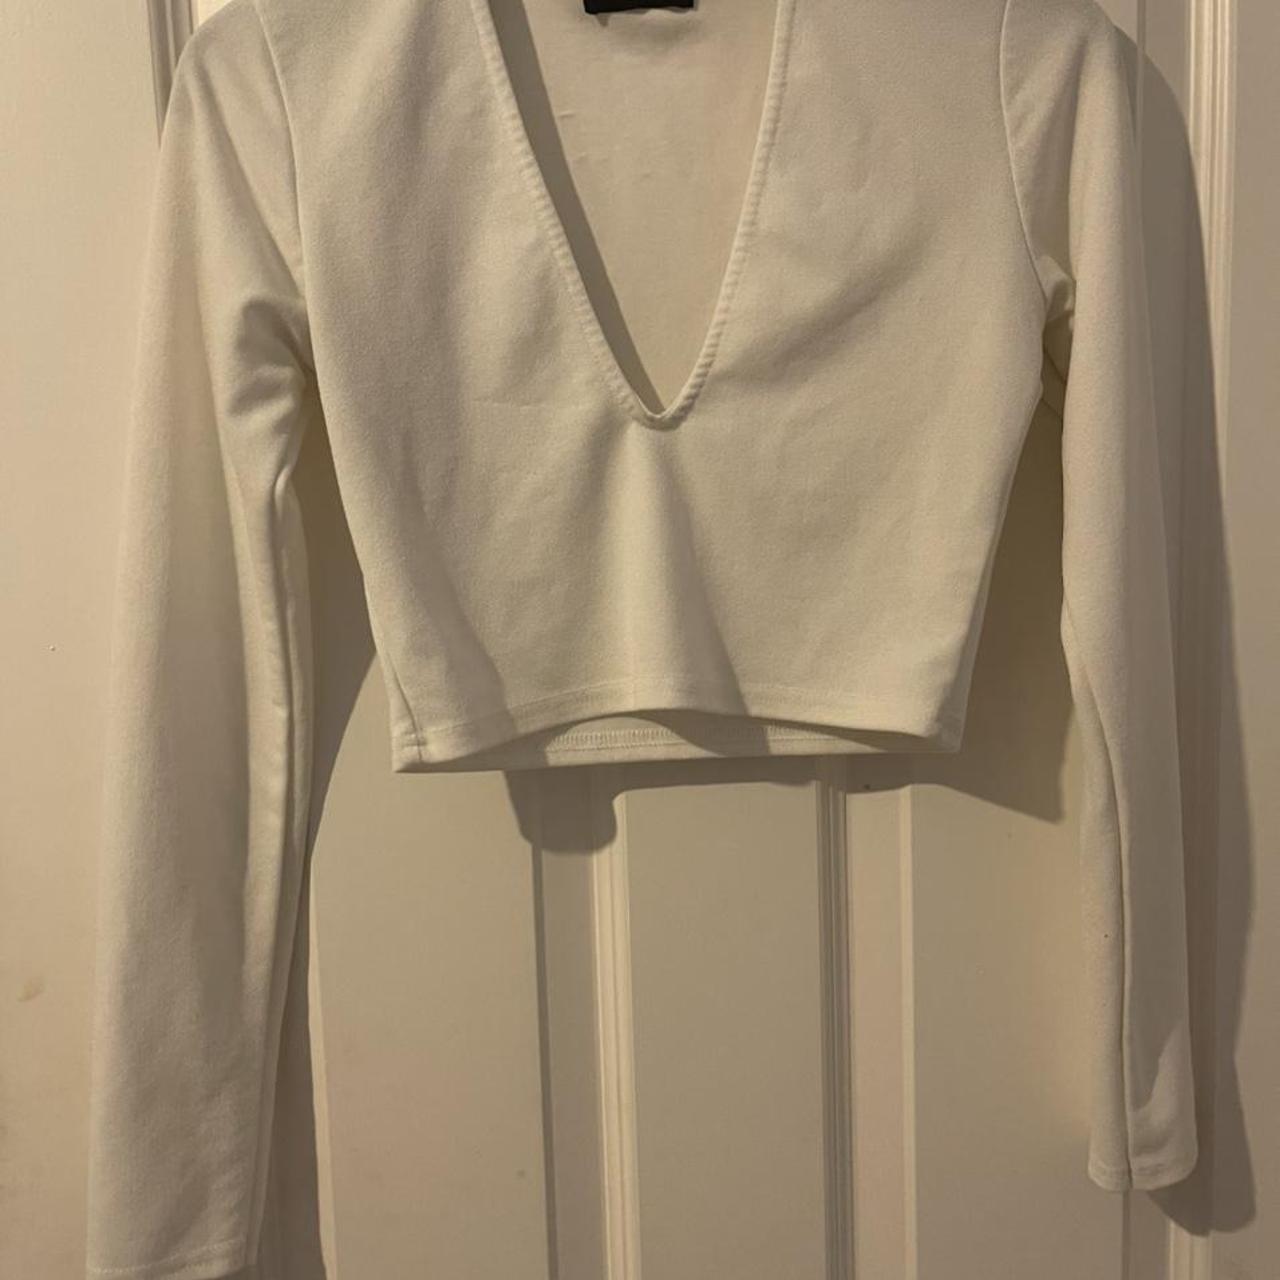 Lovely white crop top, with long sleeves and a... - Depop